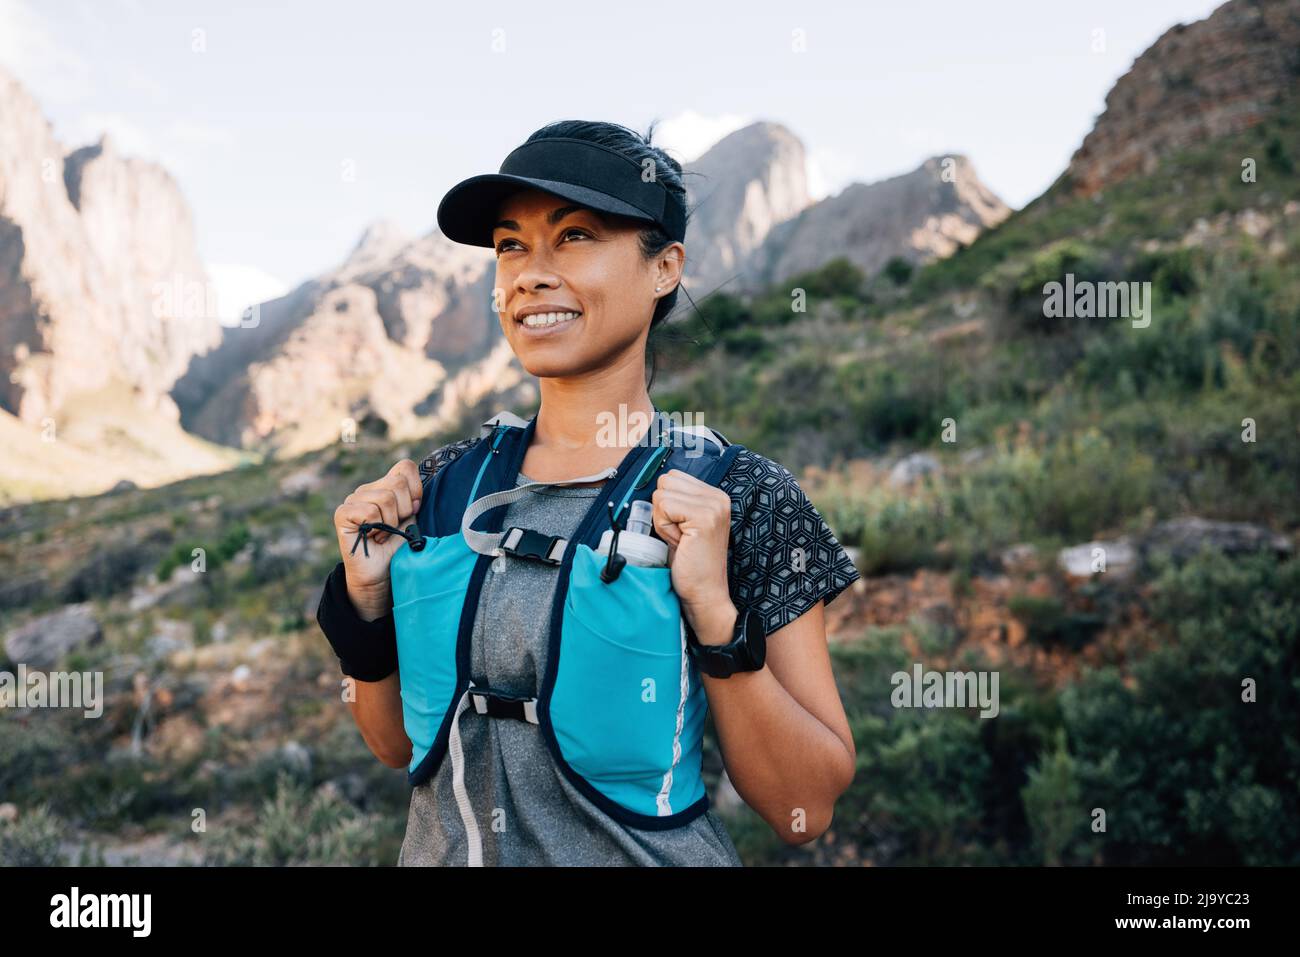 Portrait of a smiling woman in hiking attire looking away while